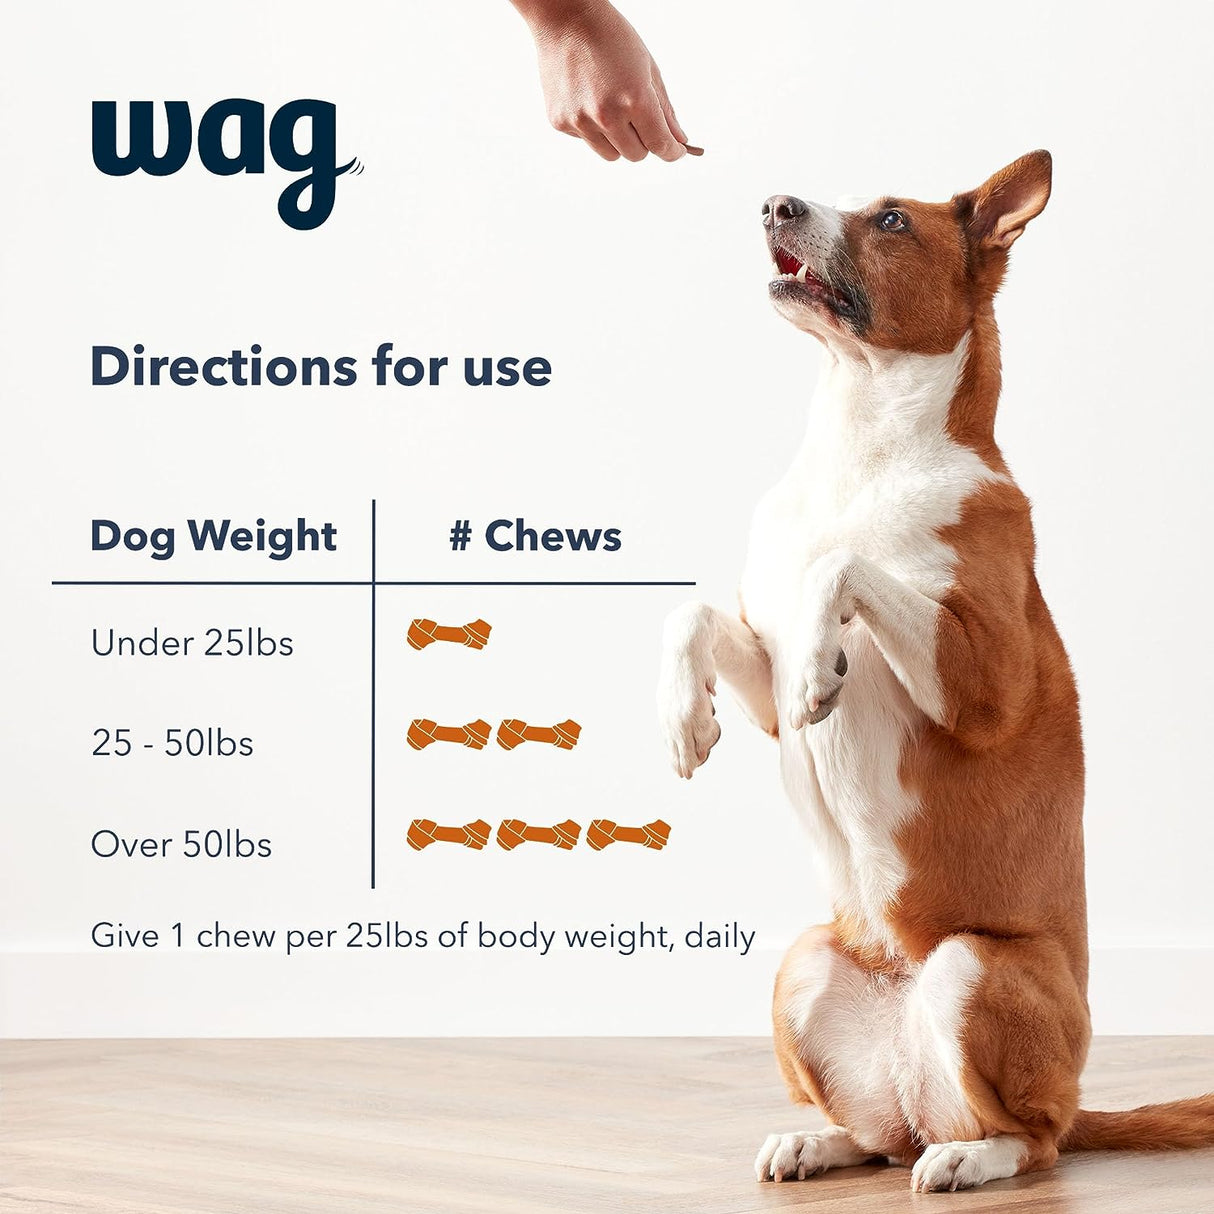 Wag Probiotic Supplement Chews for Dogs Natural Duck Flavor 90 Masticables